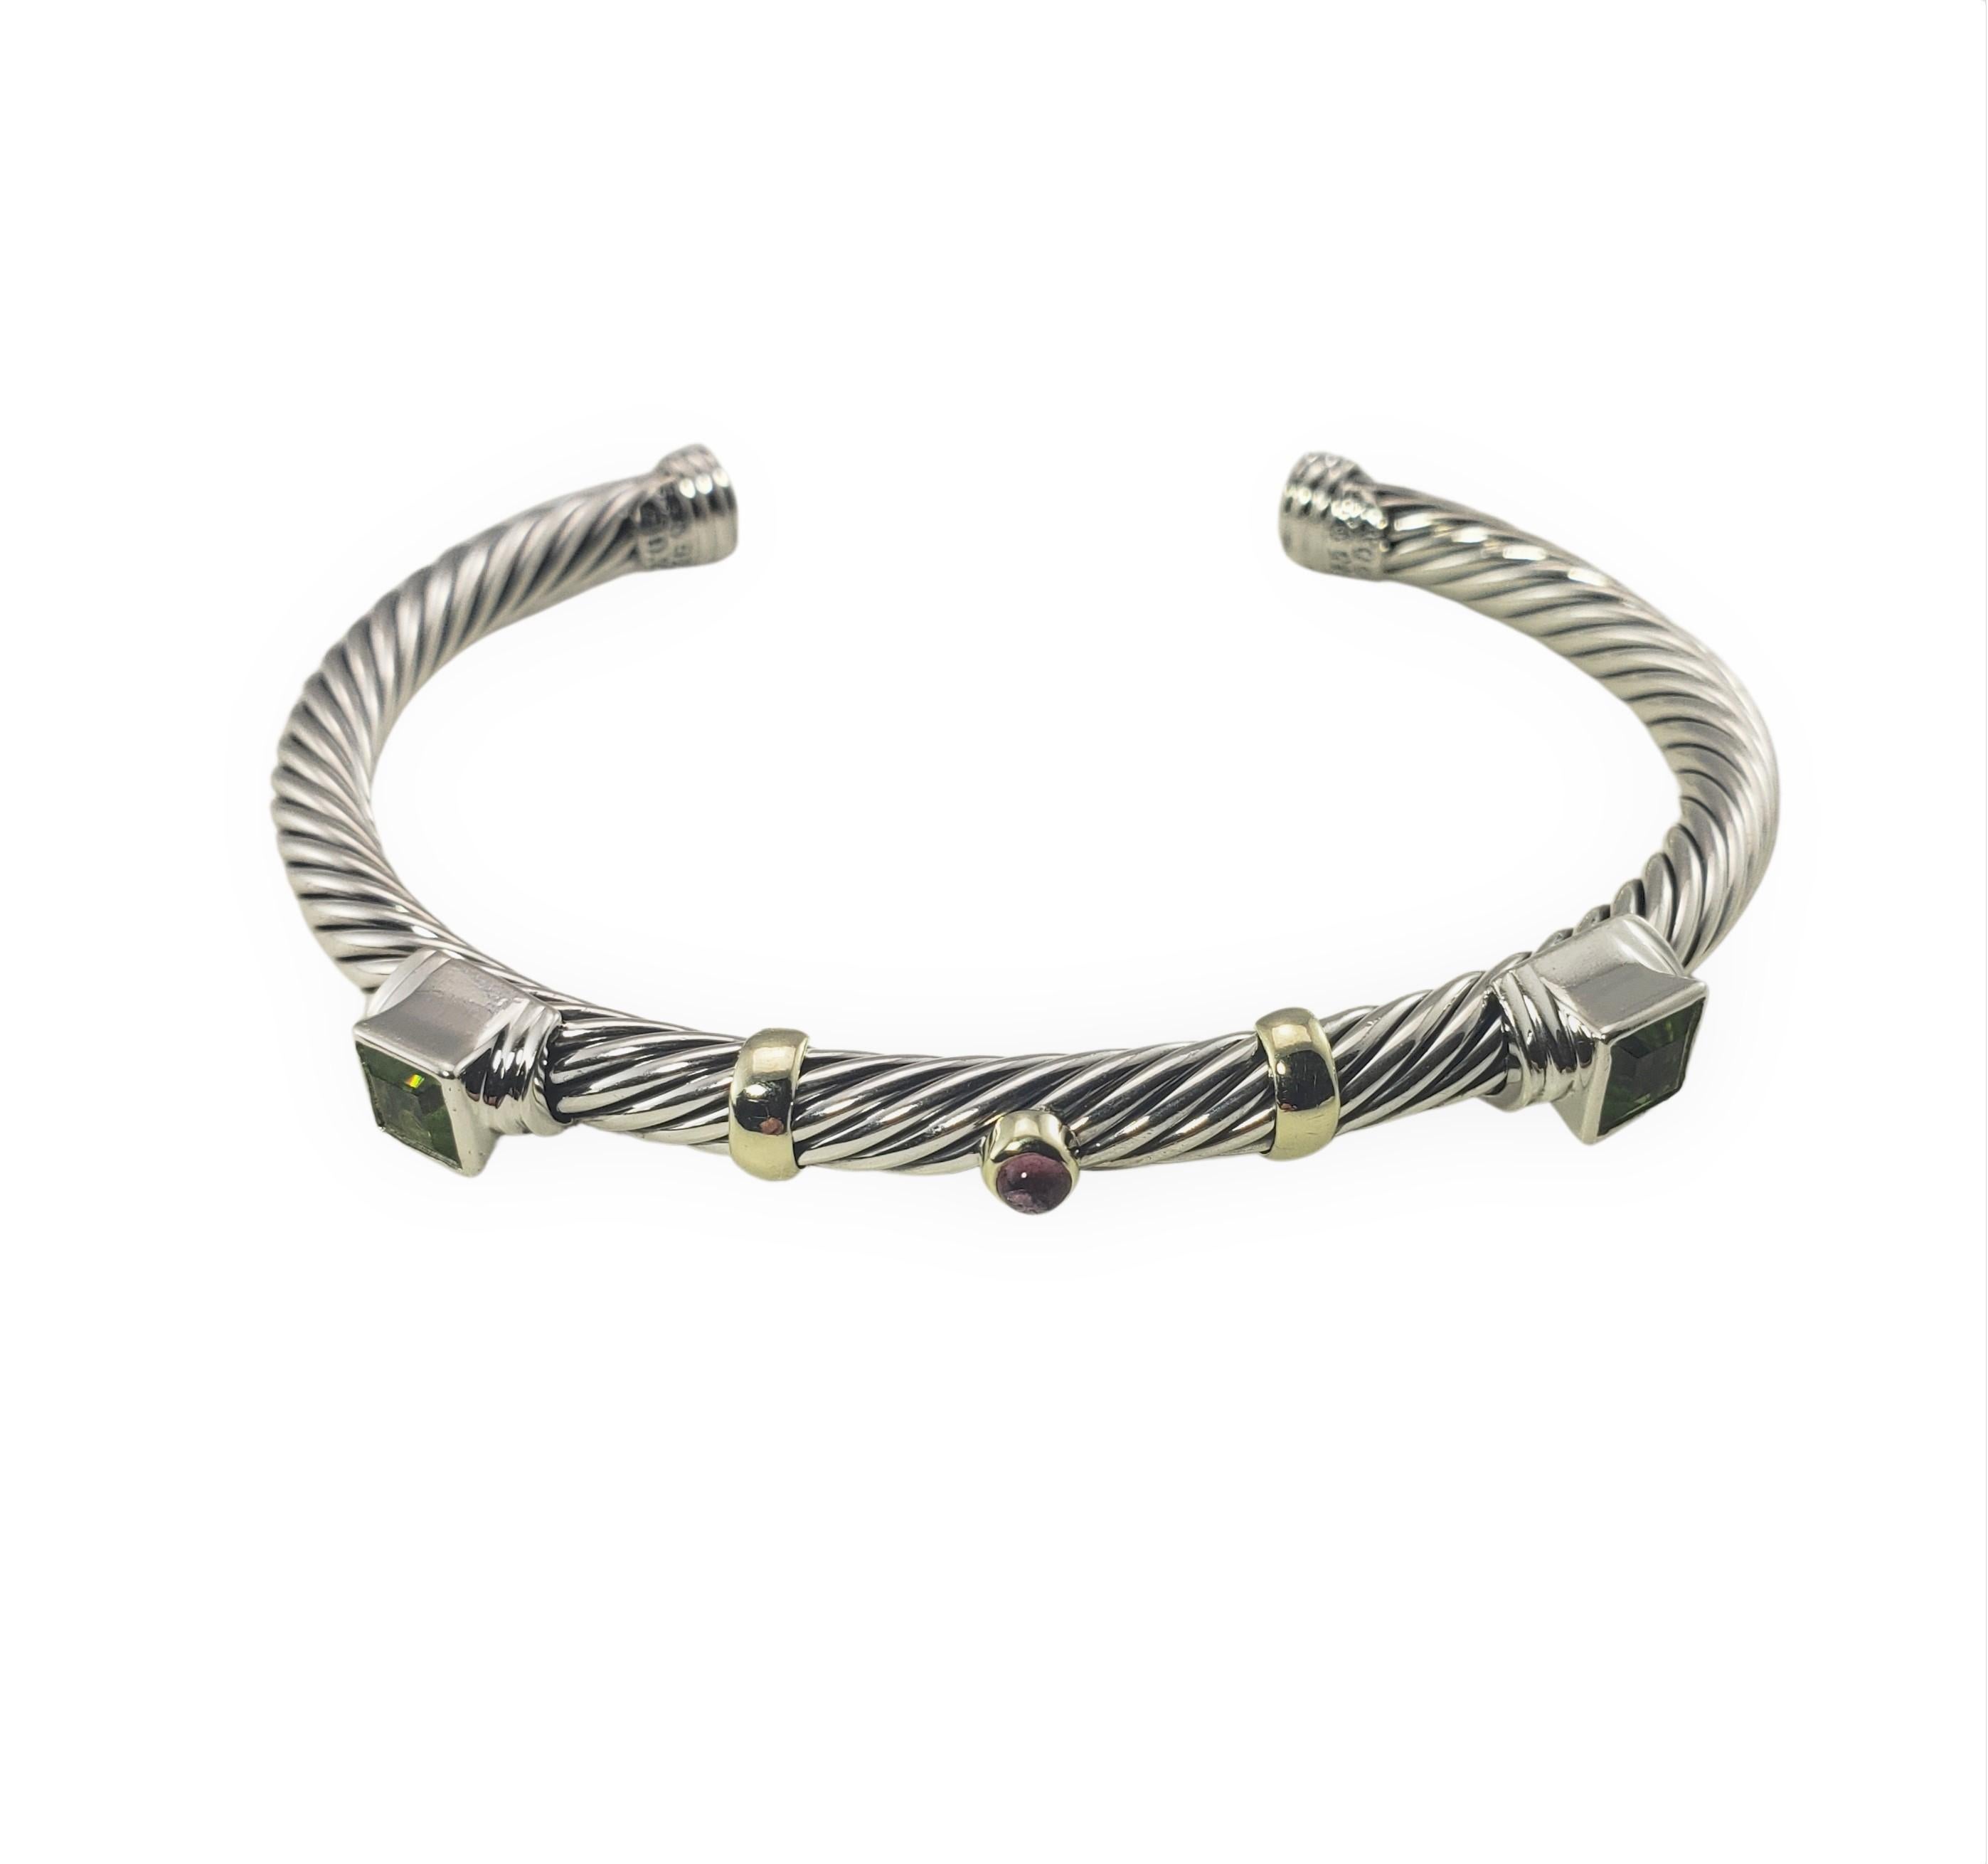 David Yurman Sterling Silver and 14 Karat Yellow Gold Peridot and Garnet Cuff Bracelet-

This lovely bracelet features two square peridot stones (6 mm x 6 mm each) and one cabochon amethyst (4 mm) set in beautifully detailed sterling silver and 14K